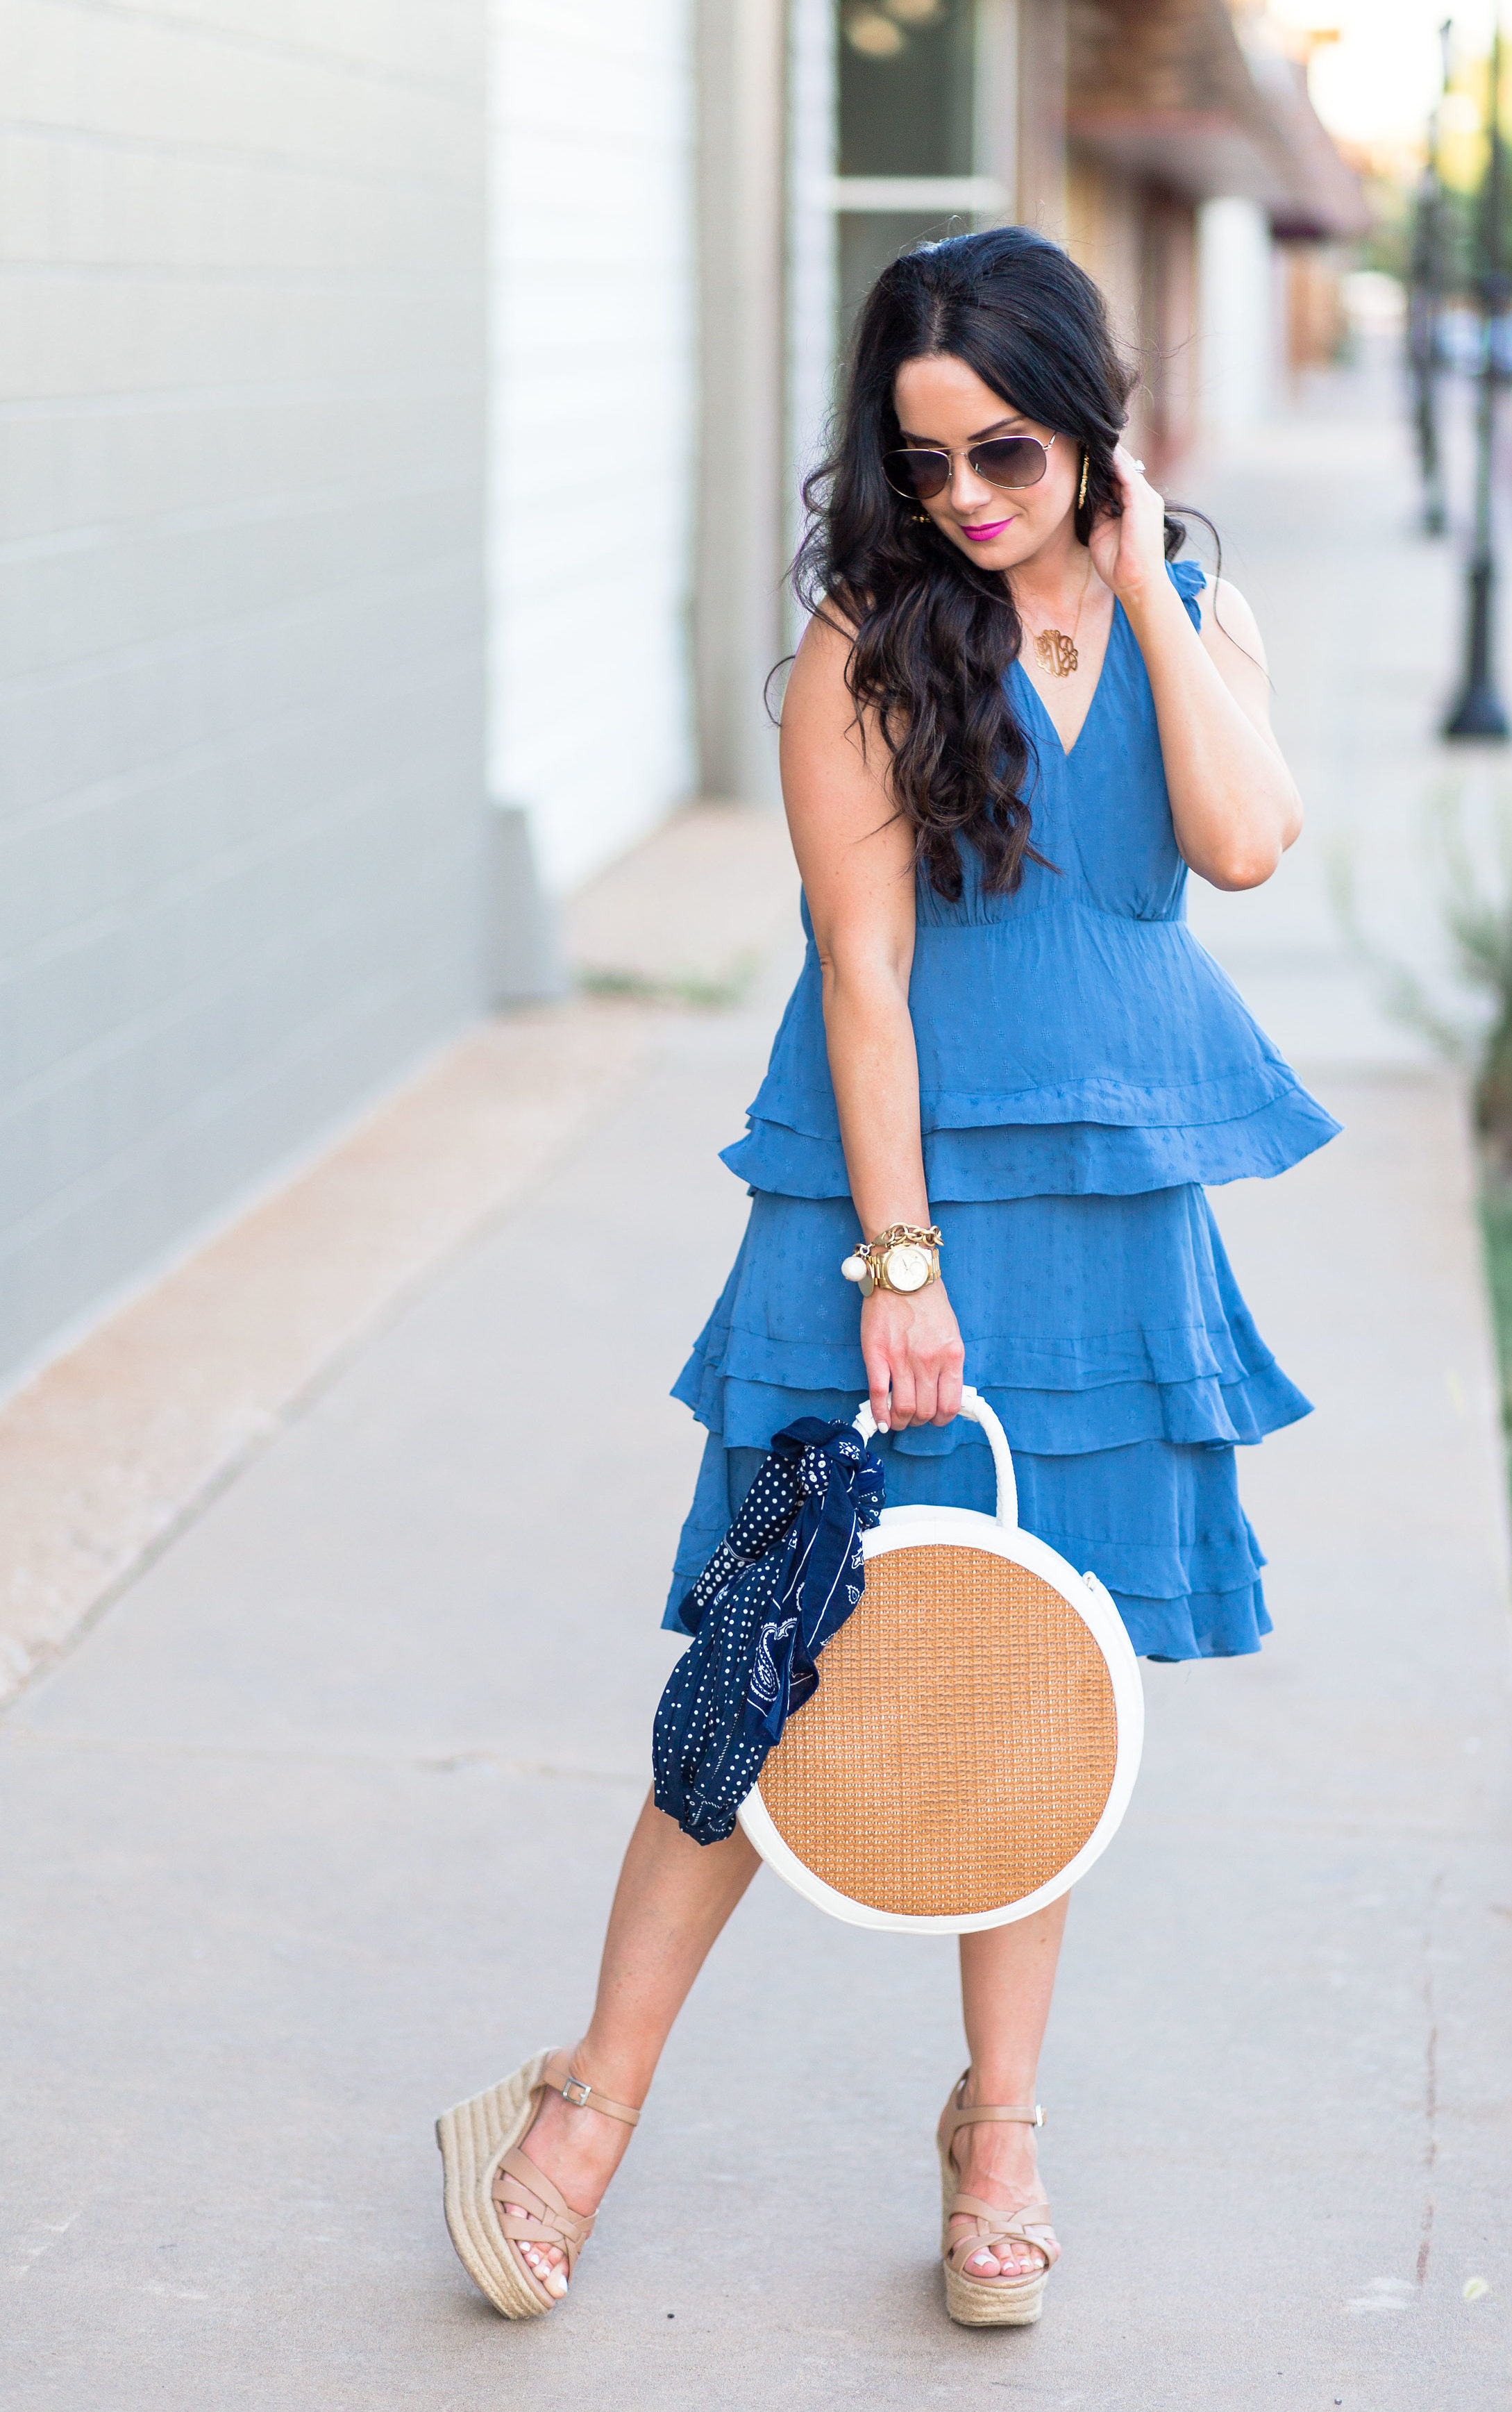 Shades of Blue | CeCe Sister Dress Style - The Double Take Girls Shades ...